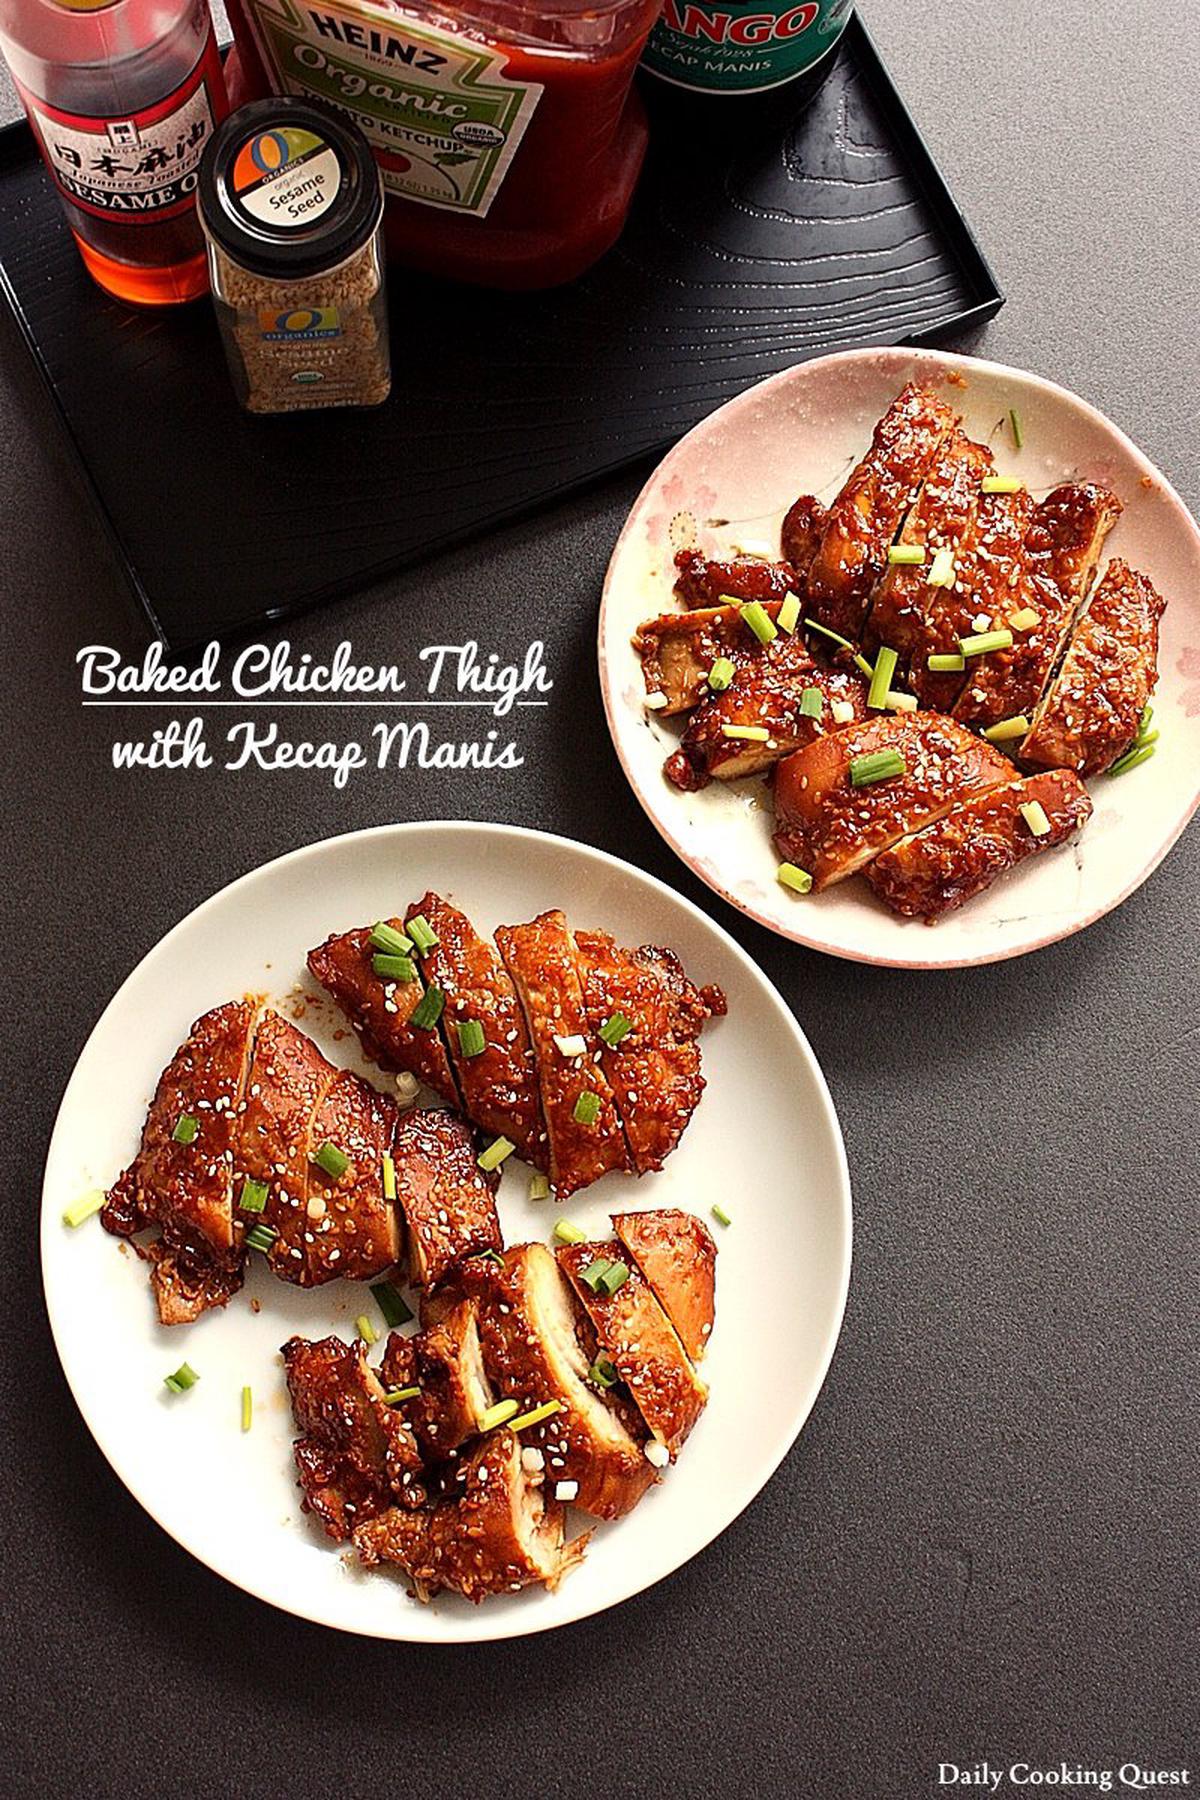 Baked Chicken Thigh with Kecap Manis